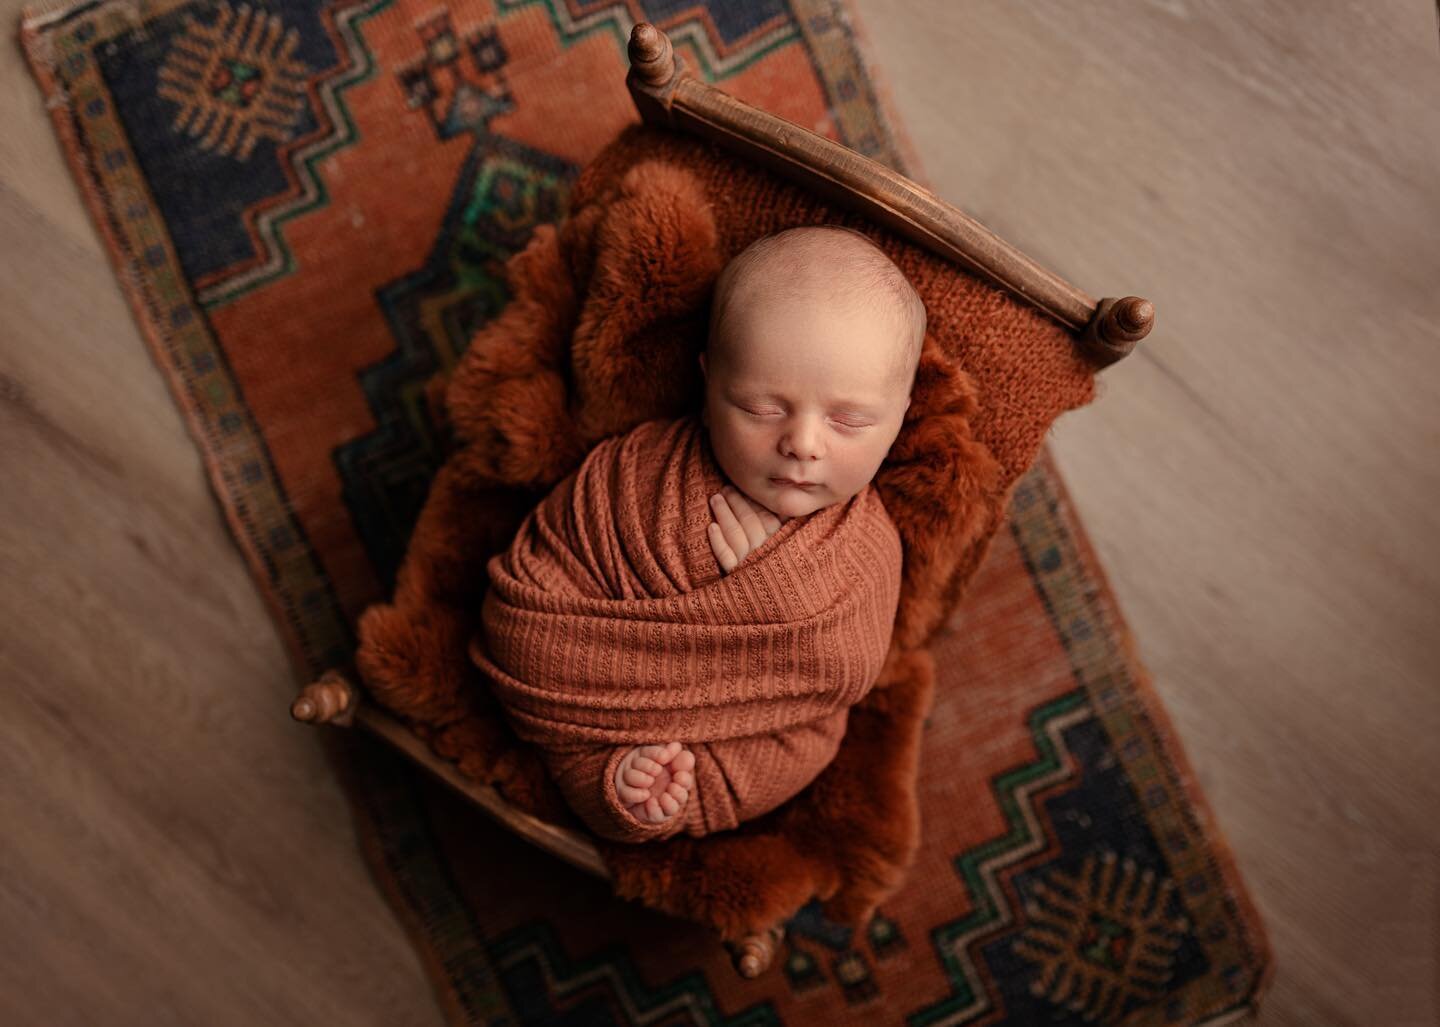 How lucky am I that this adorable little dude is the SECOND baby I&rsquo;ve had the pleasure of photographing for his sweet little family? Swipe to see his beautiful big sister when she came to see me for her Newborn Portrait Session in 2021! 🧡

Cur